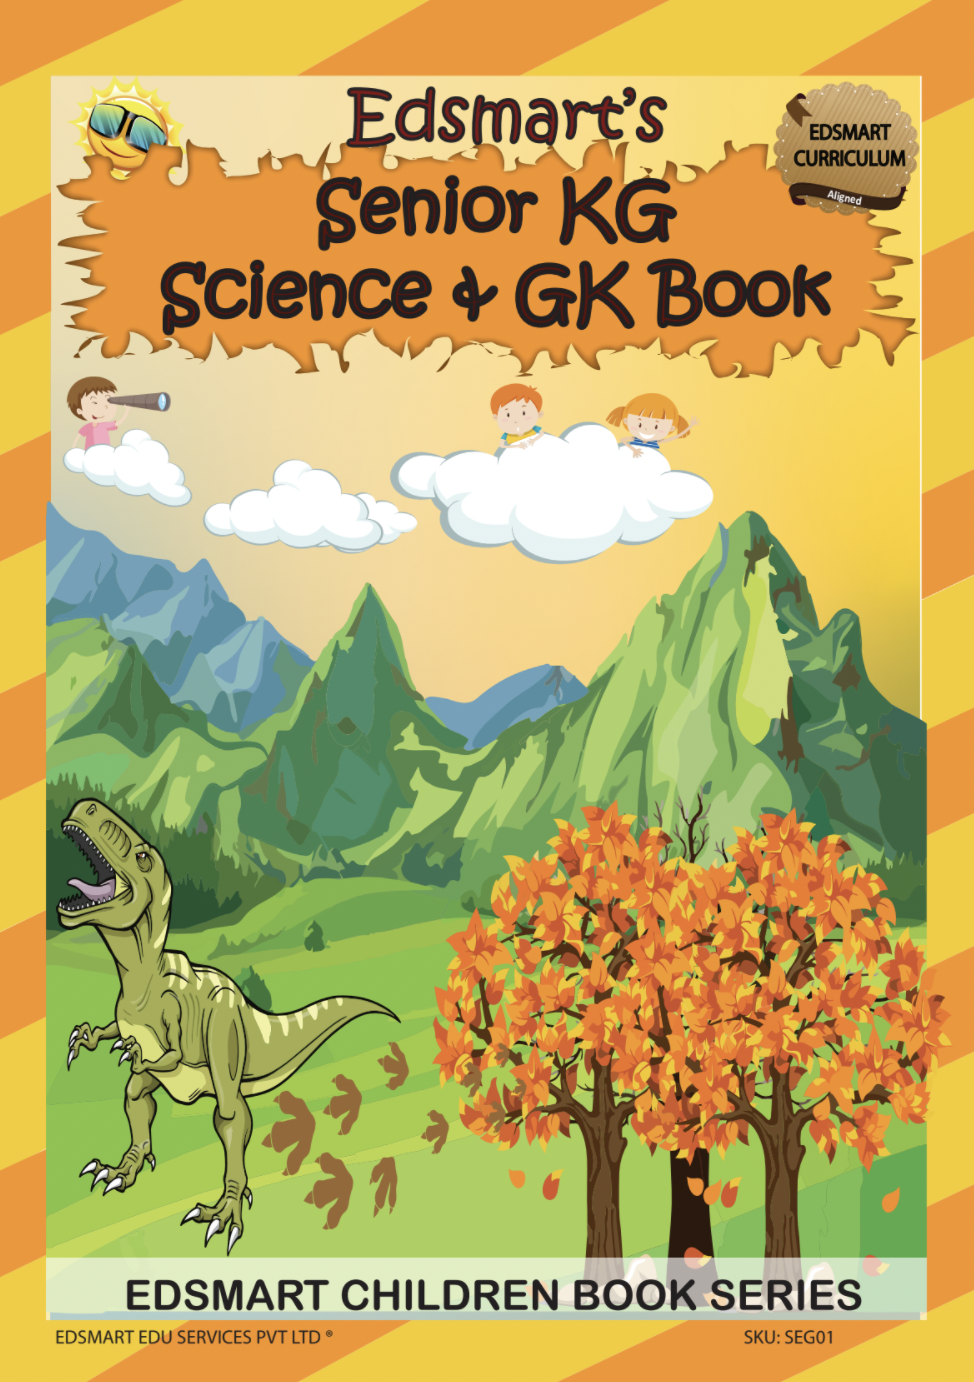 Senior KG Maths and Science Book combo - 3 books